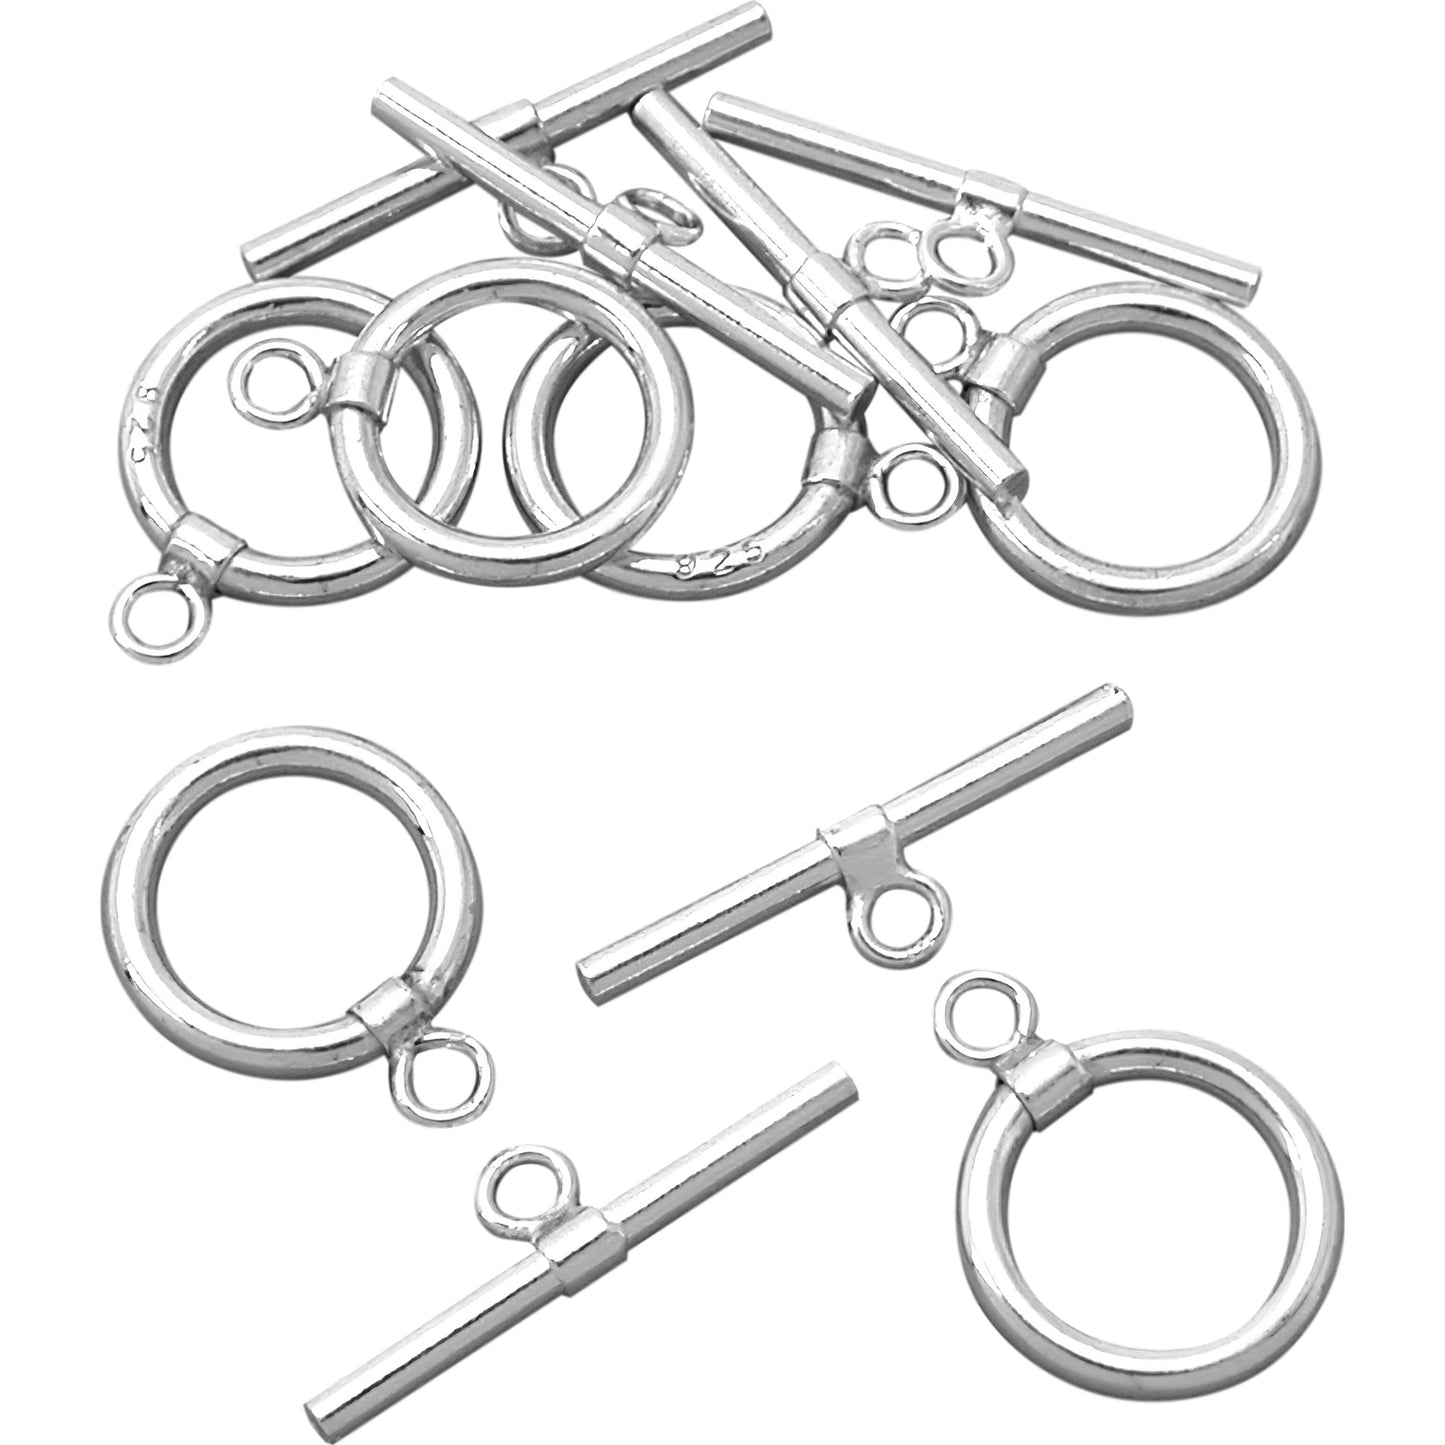 6 Toggle Clasps Sterling Silver High Polished 18x11mm